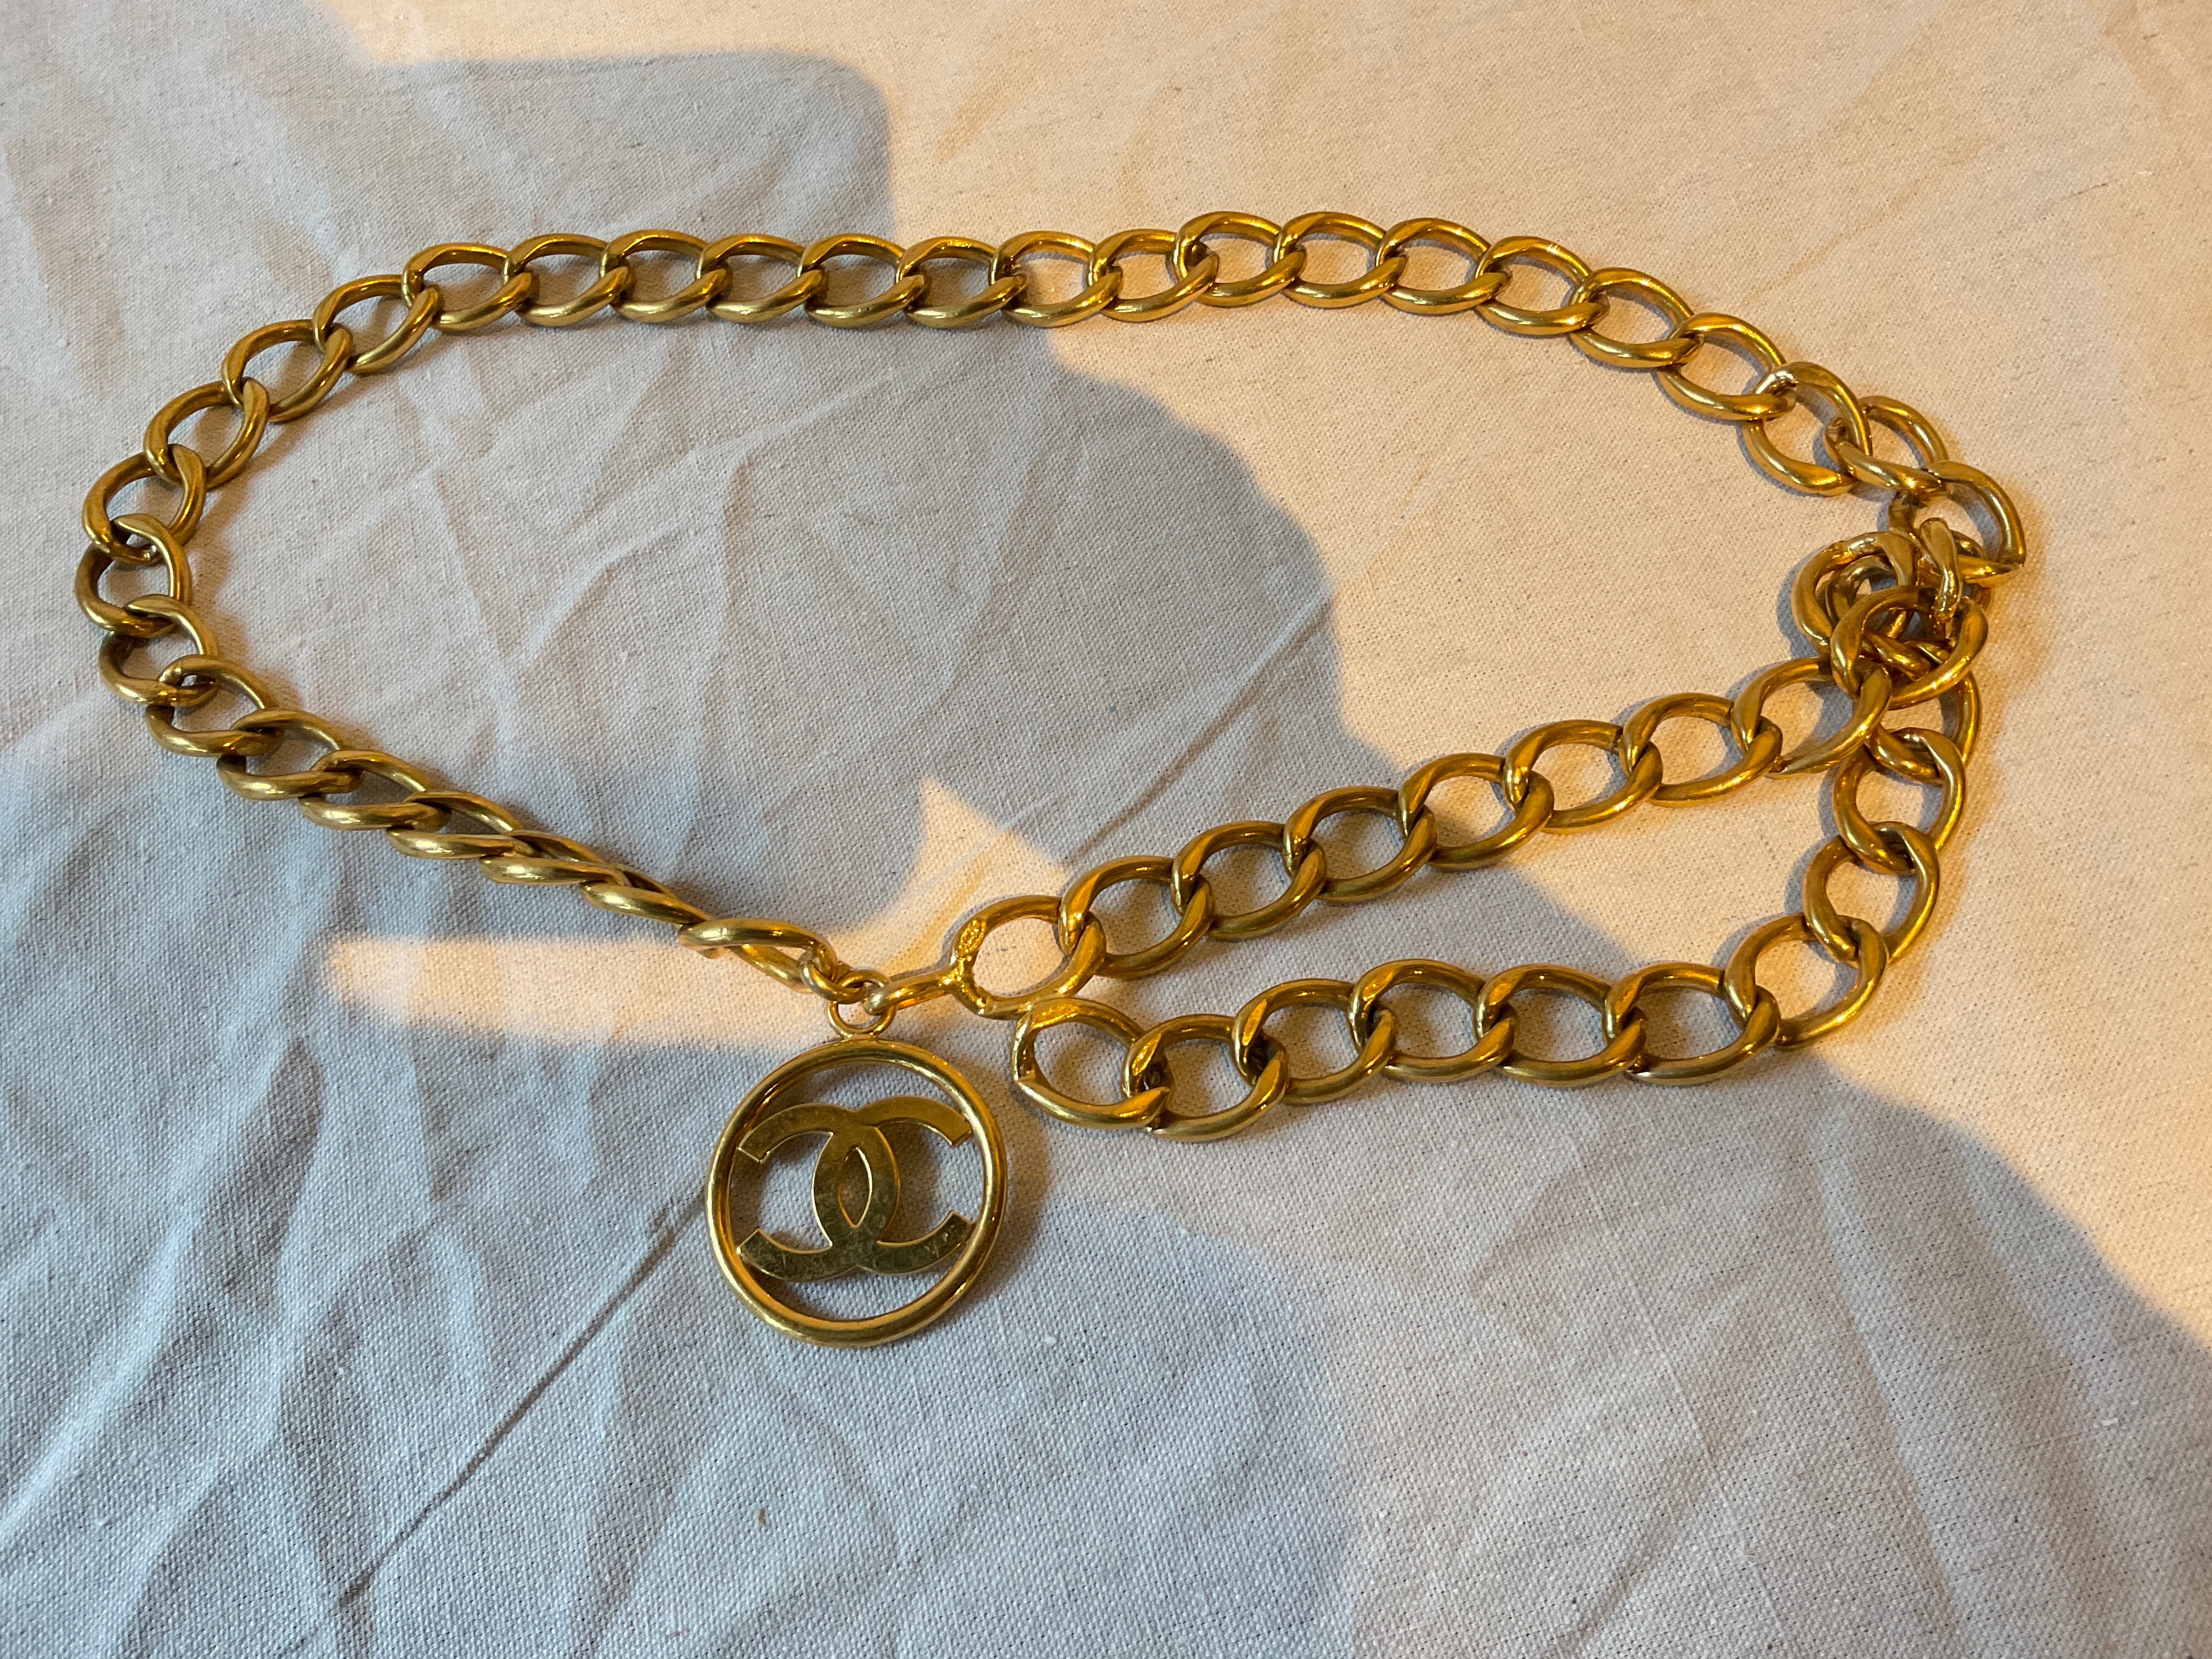 1990s Chanel gold metal chain link belt.